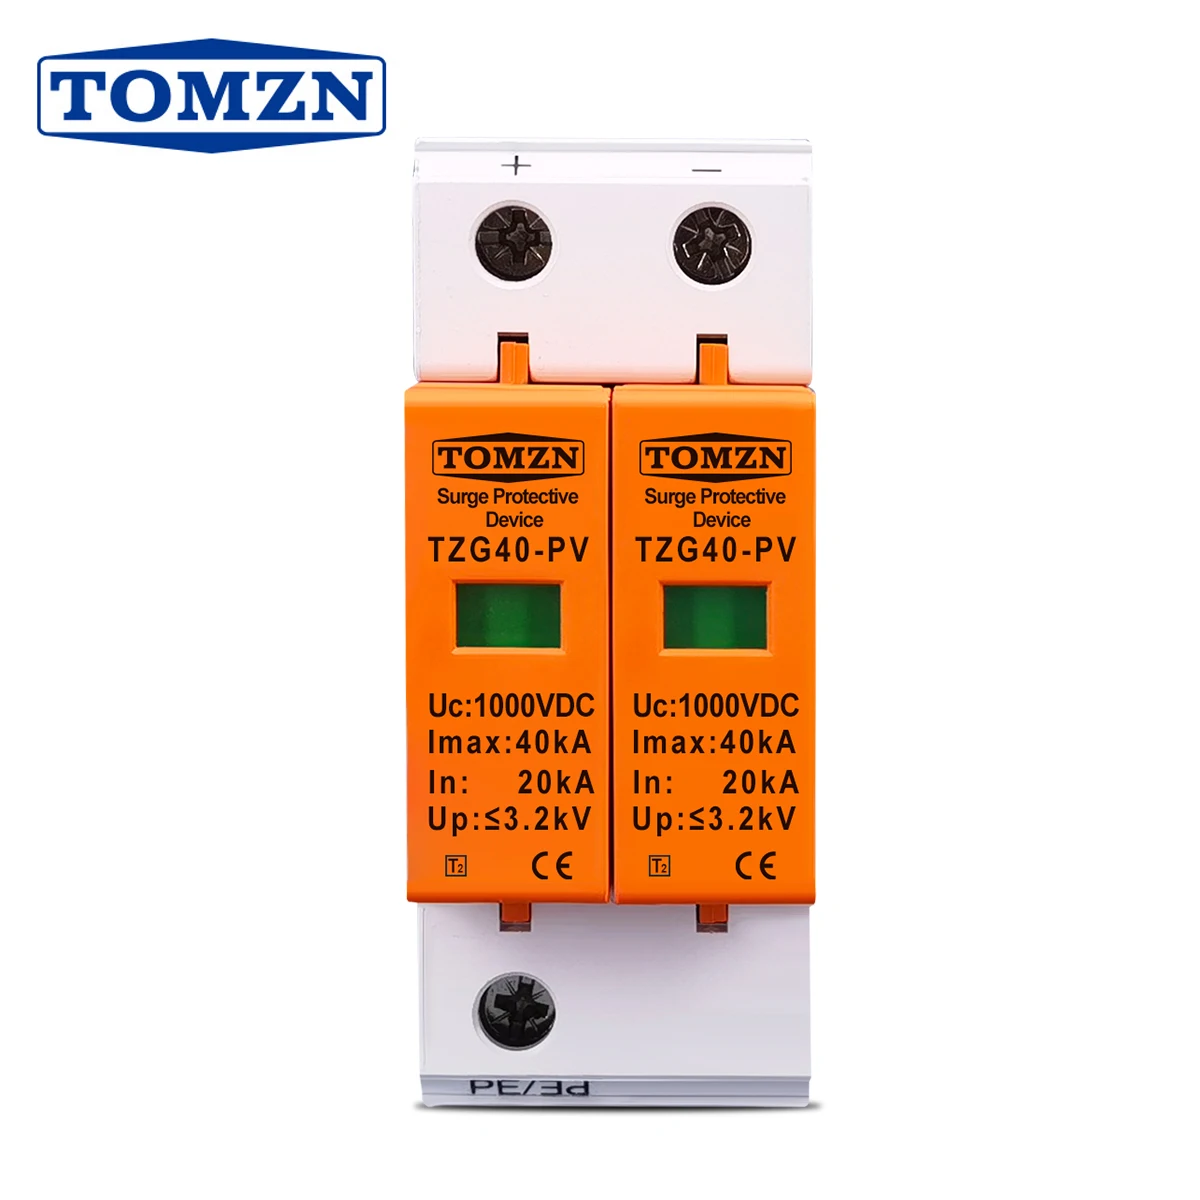 SPD DC 1000V 20KA~40KA House Surge Protector Protective Low-voltage Arrester Device 2p 63a 3 phase voltage protective device 4 wire automatic recovery over